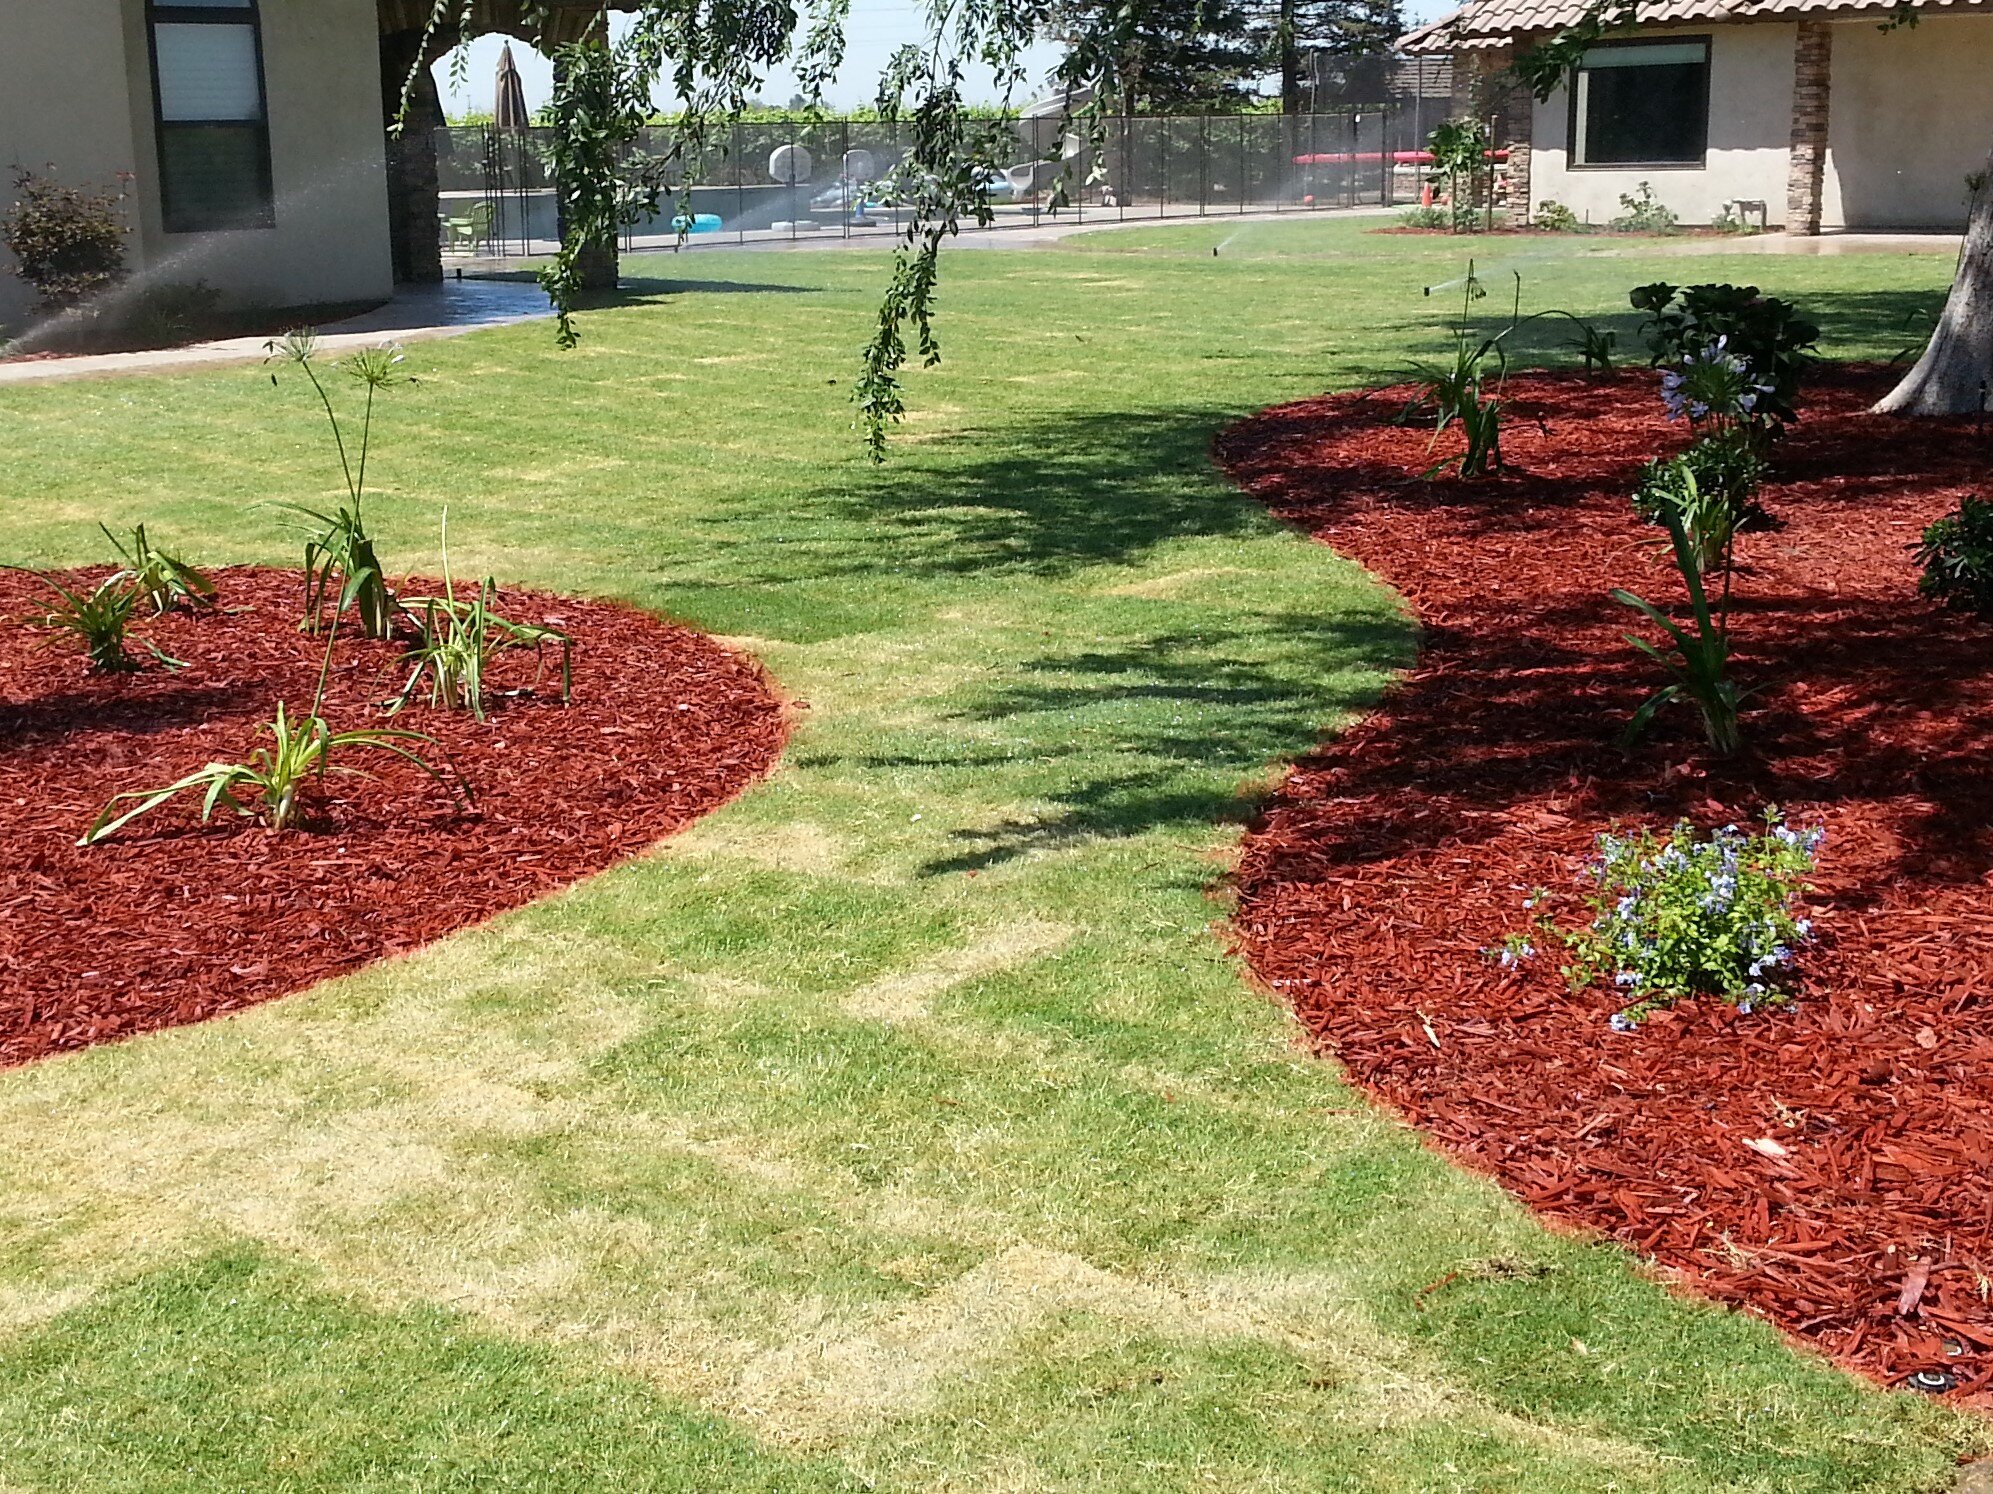 Image of 2 yards of red mulch